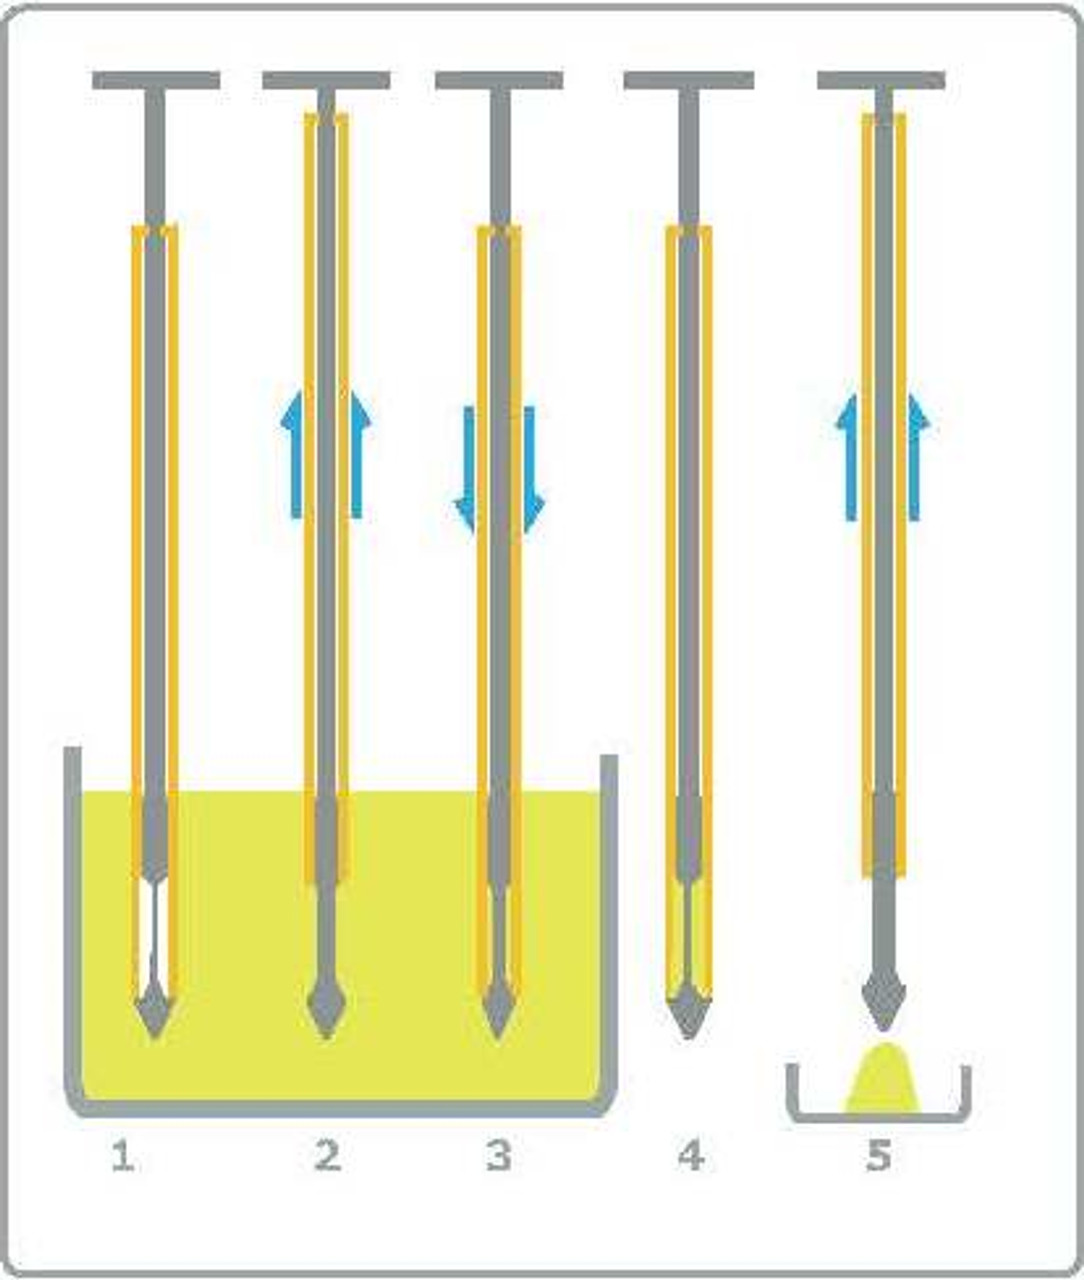 Operation
1. Insert the sampler into the product. Ensure that the tip is inside the
    sampler body
2. At the required depth pull up the body to expose the tip. The sample
    will fall in around the tip
3. Push down body of the sampler to trap the sample
4. Withdraw sampler
5. Pull up body to empty sample